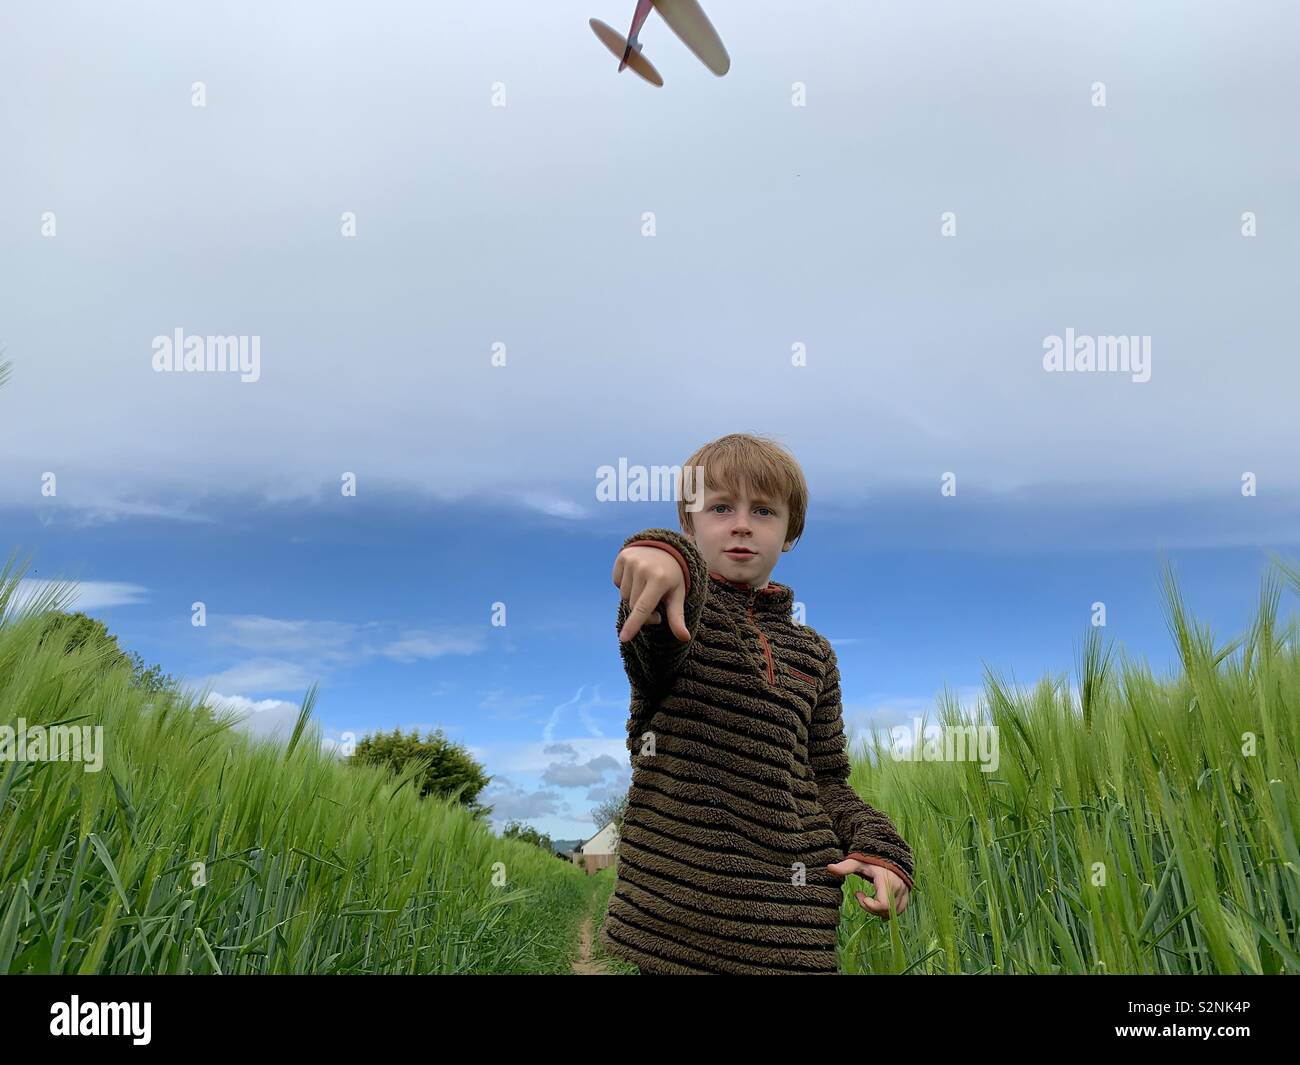 7 year old boy throwing a model plane in a field Stock Photo